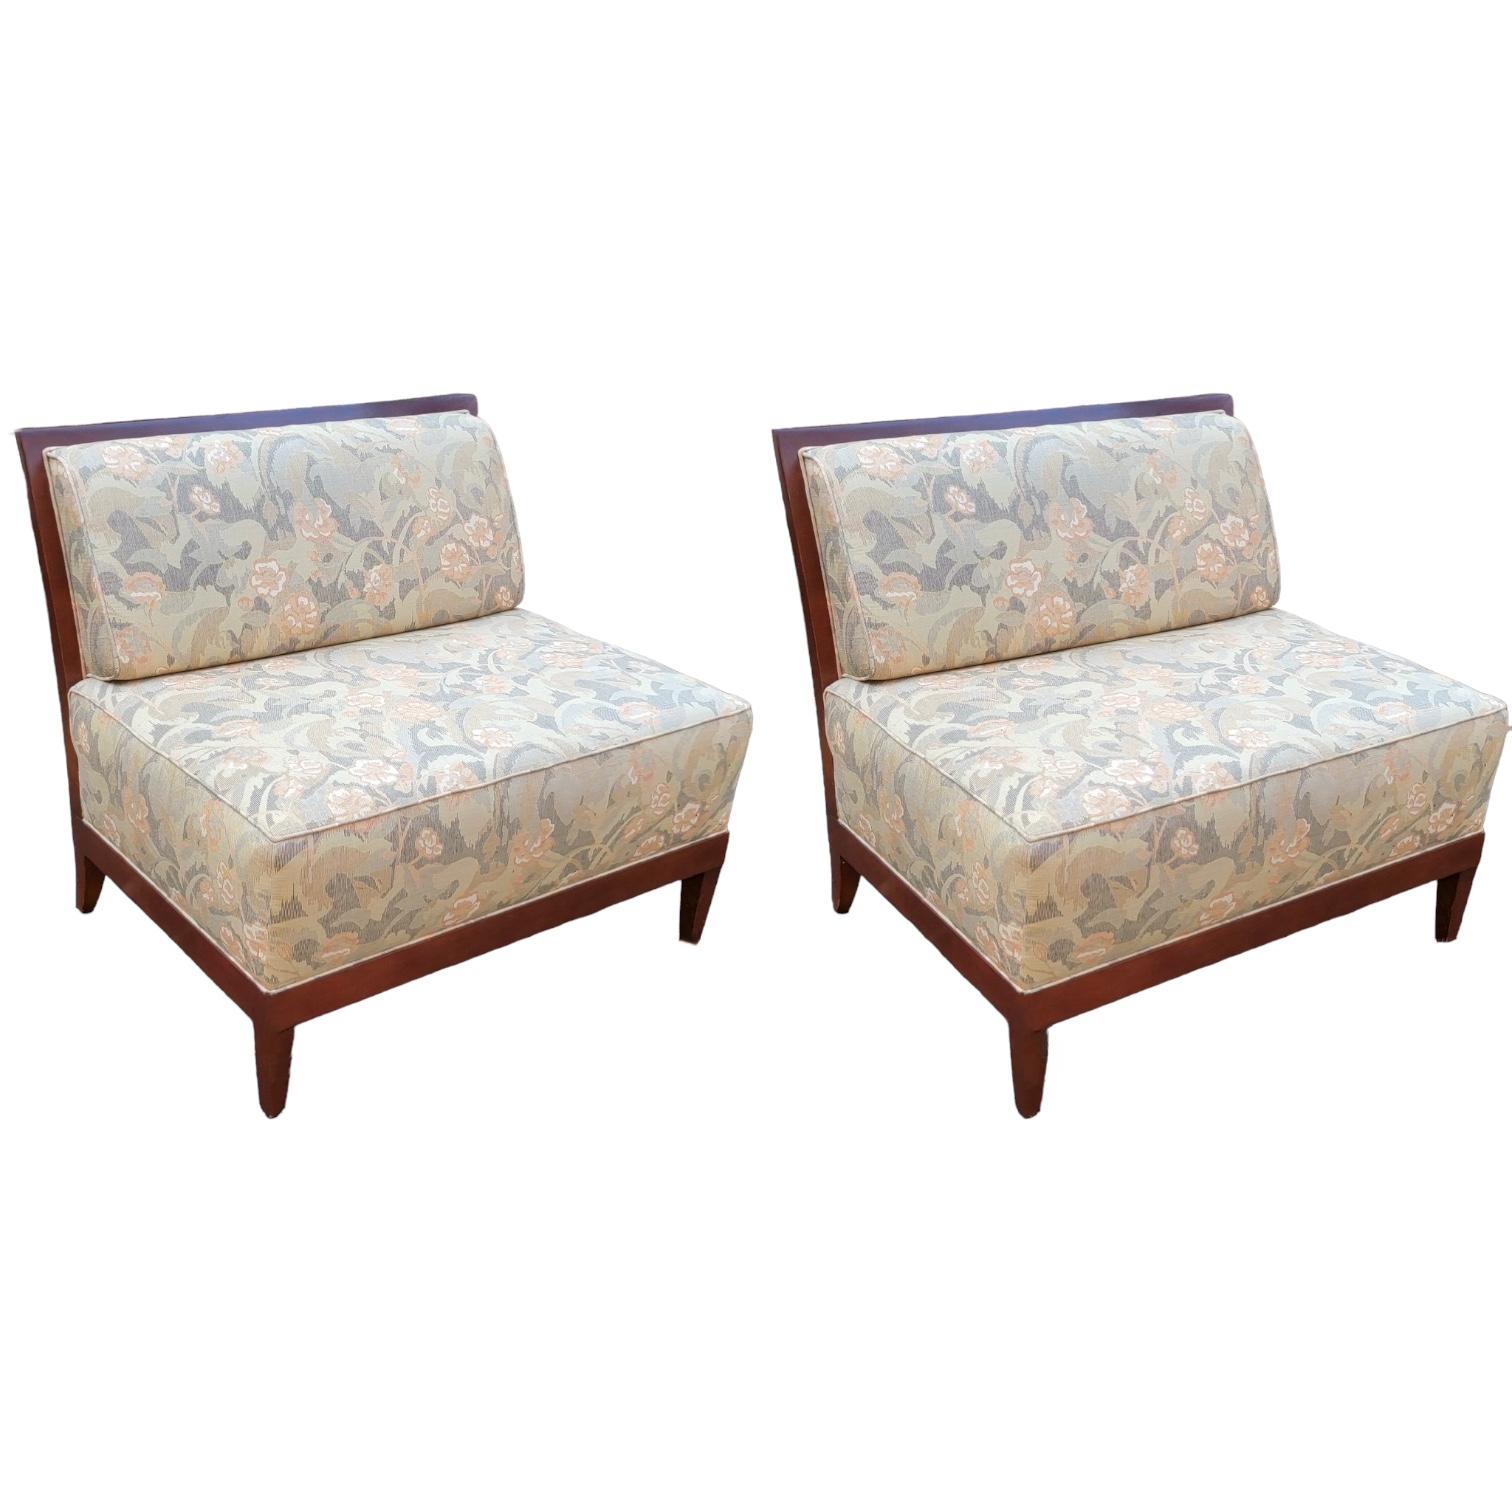 American Modern Art Deco Style Mahogany Settees  / Large Chair By Baker Furniture - Pair For Sale